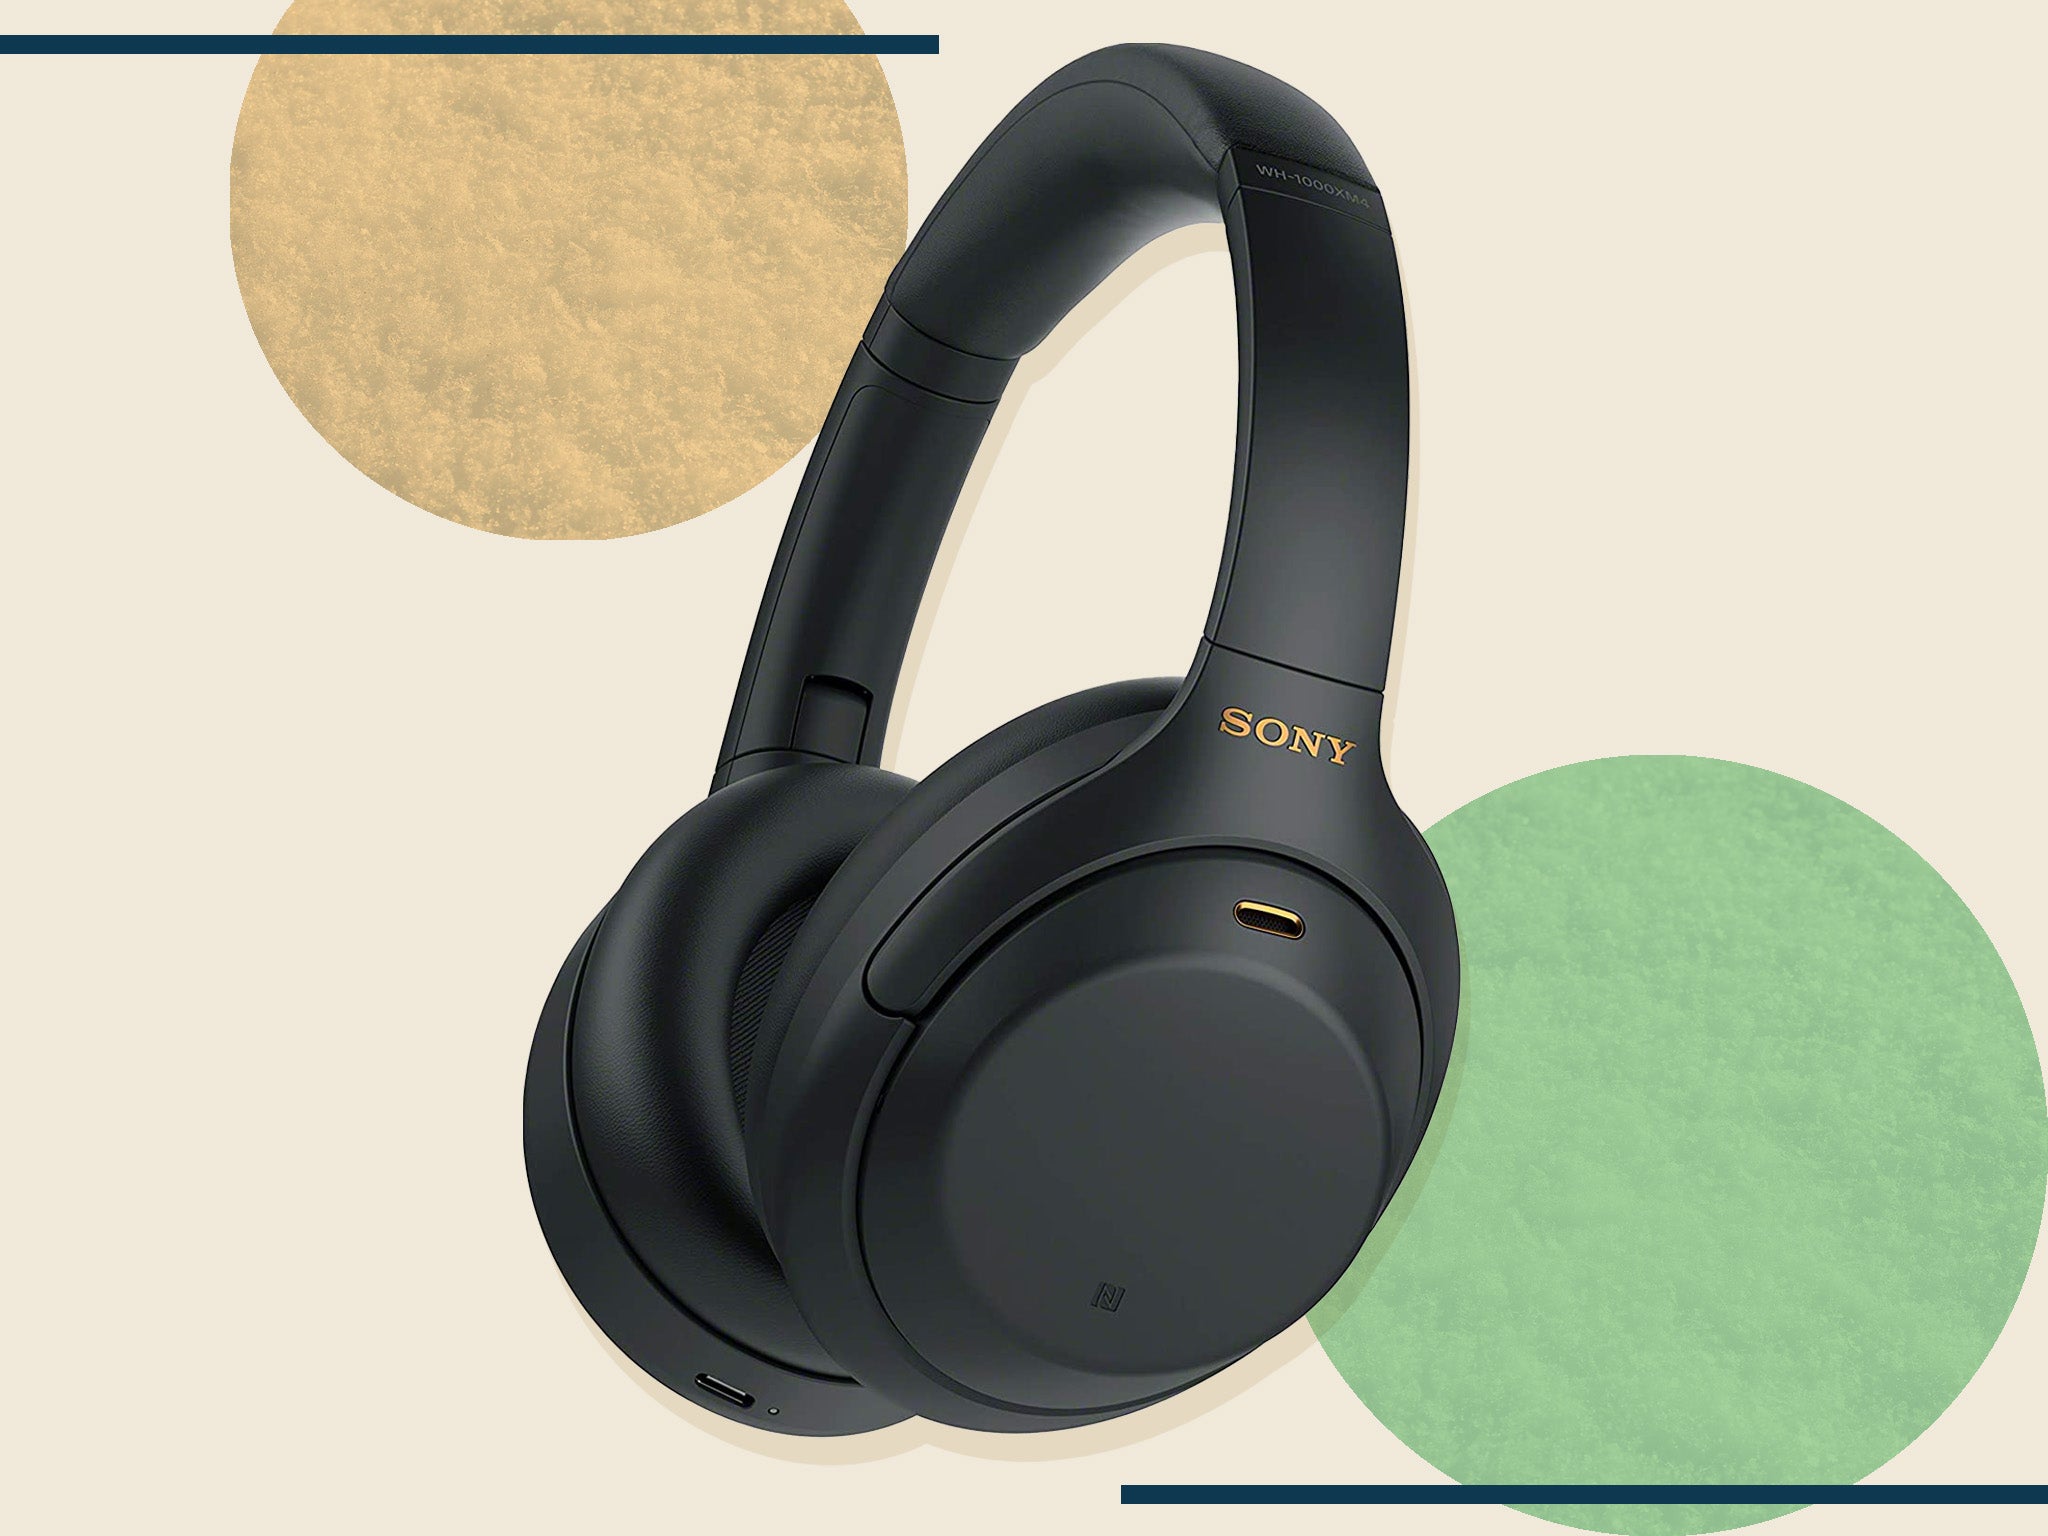 Amazon Prime Day 2022: Save 40% on Sony's WH-1000XM4 noise